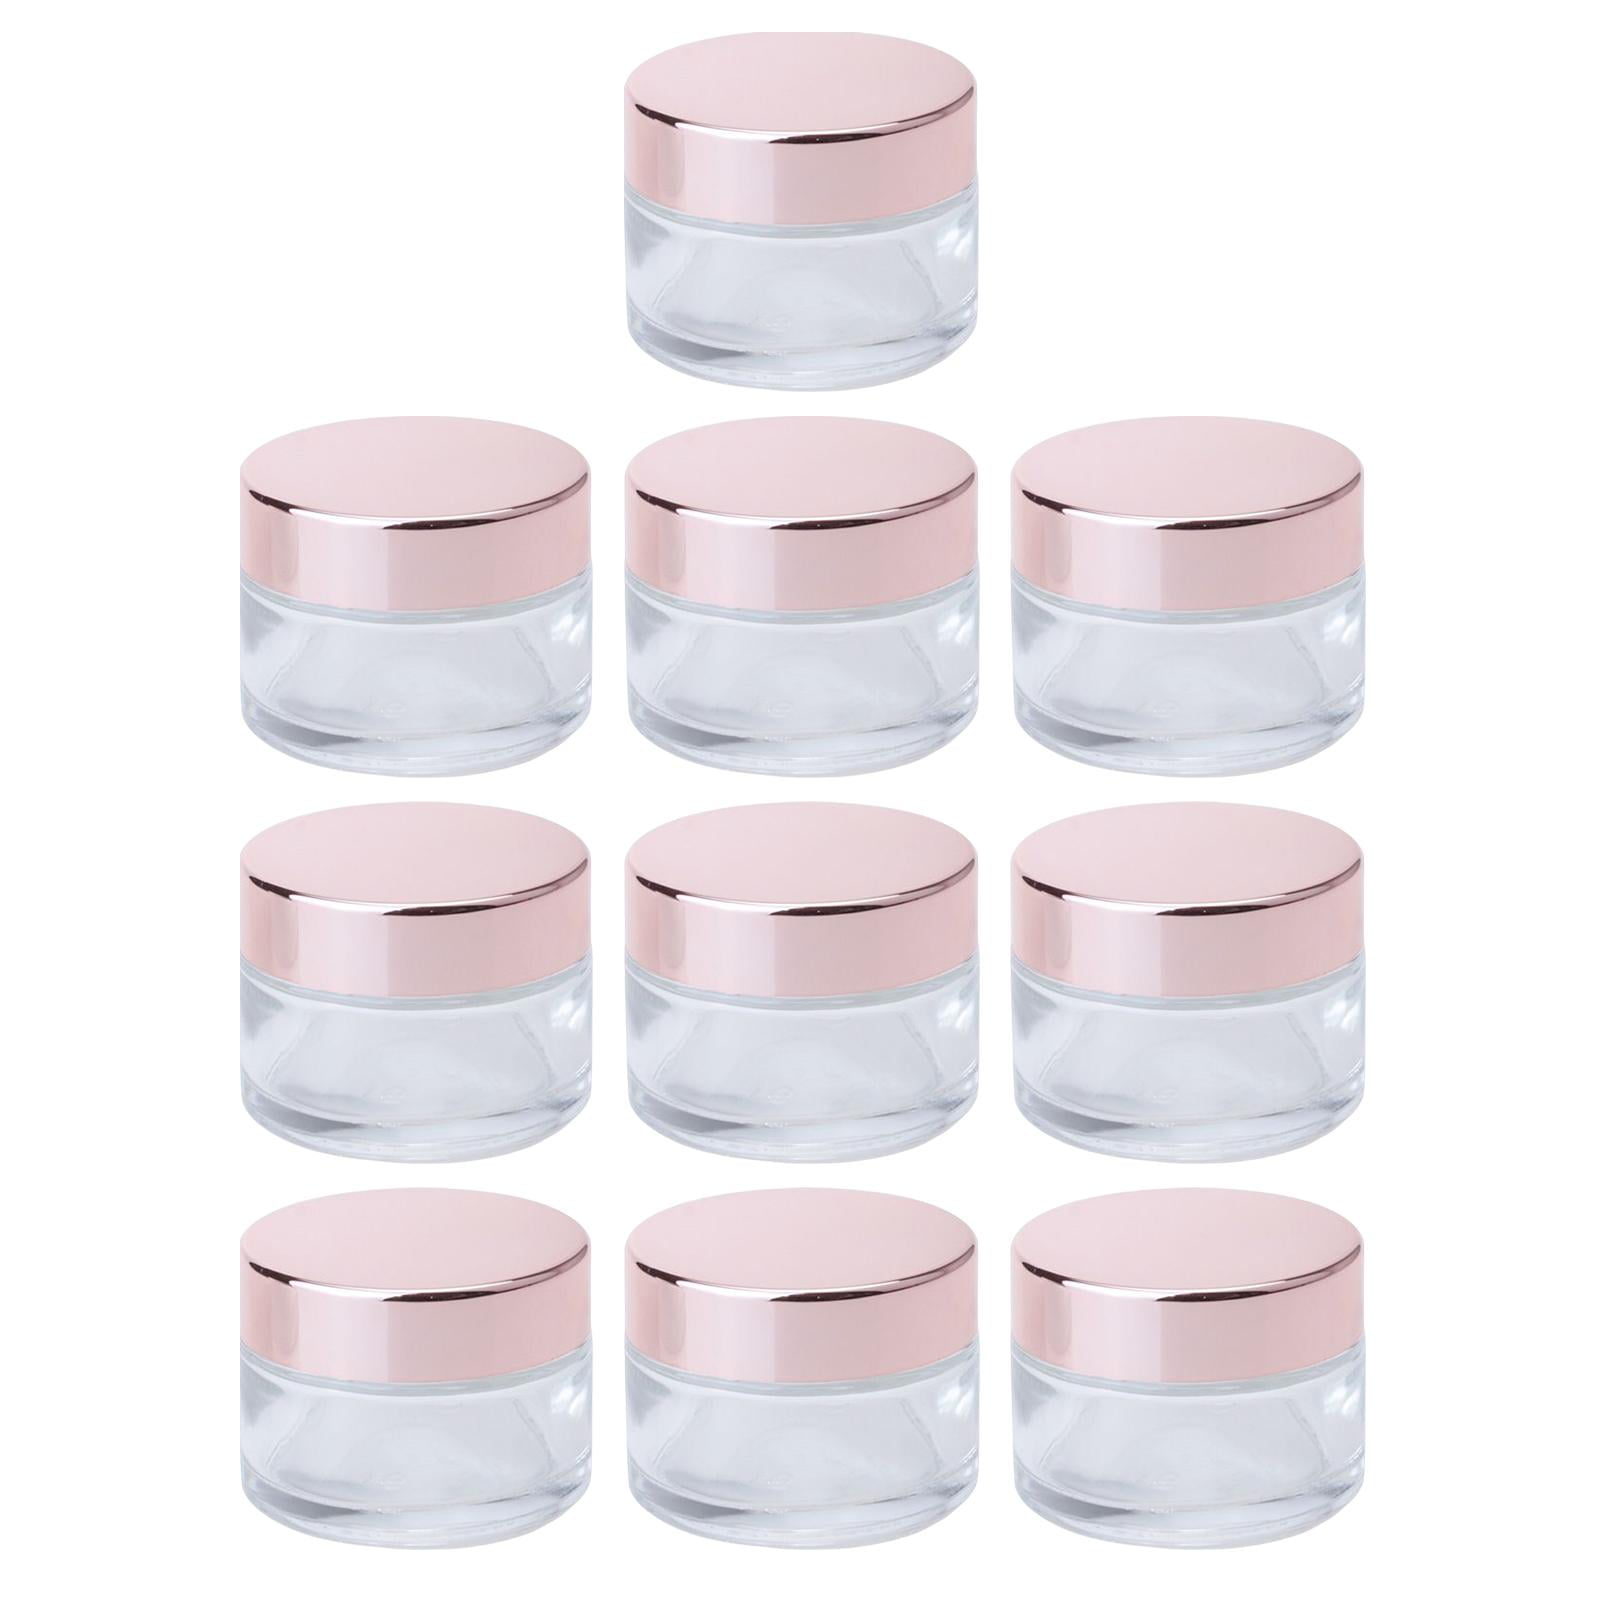 Cositina 4 Pack 3.4 oz Pink Glass Jars with Rose-Golden Lids & Inner  Liners,Empty Round Storage Containers Travel Jars Pot,for Cosmetics,Gel,Eye